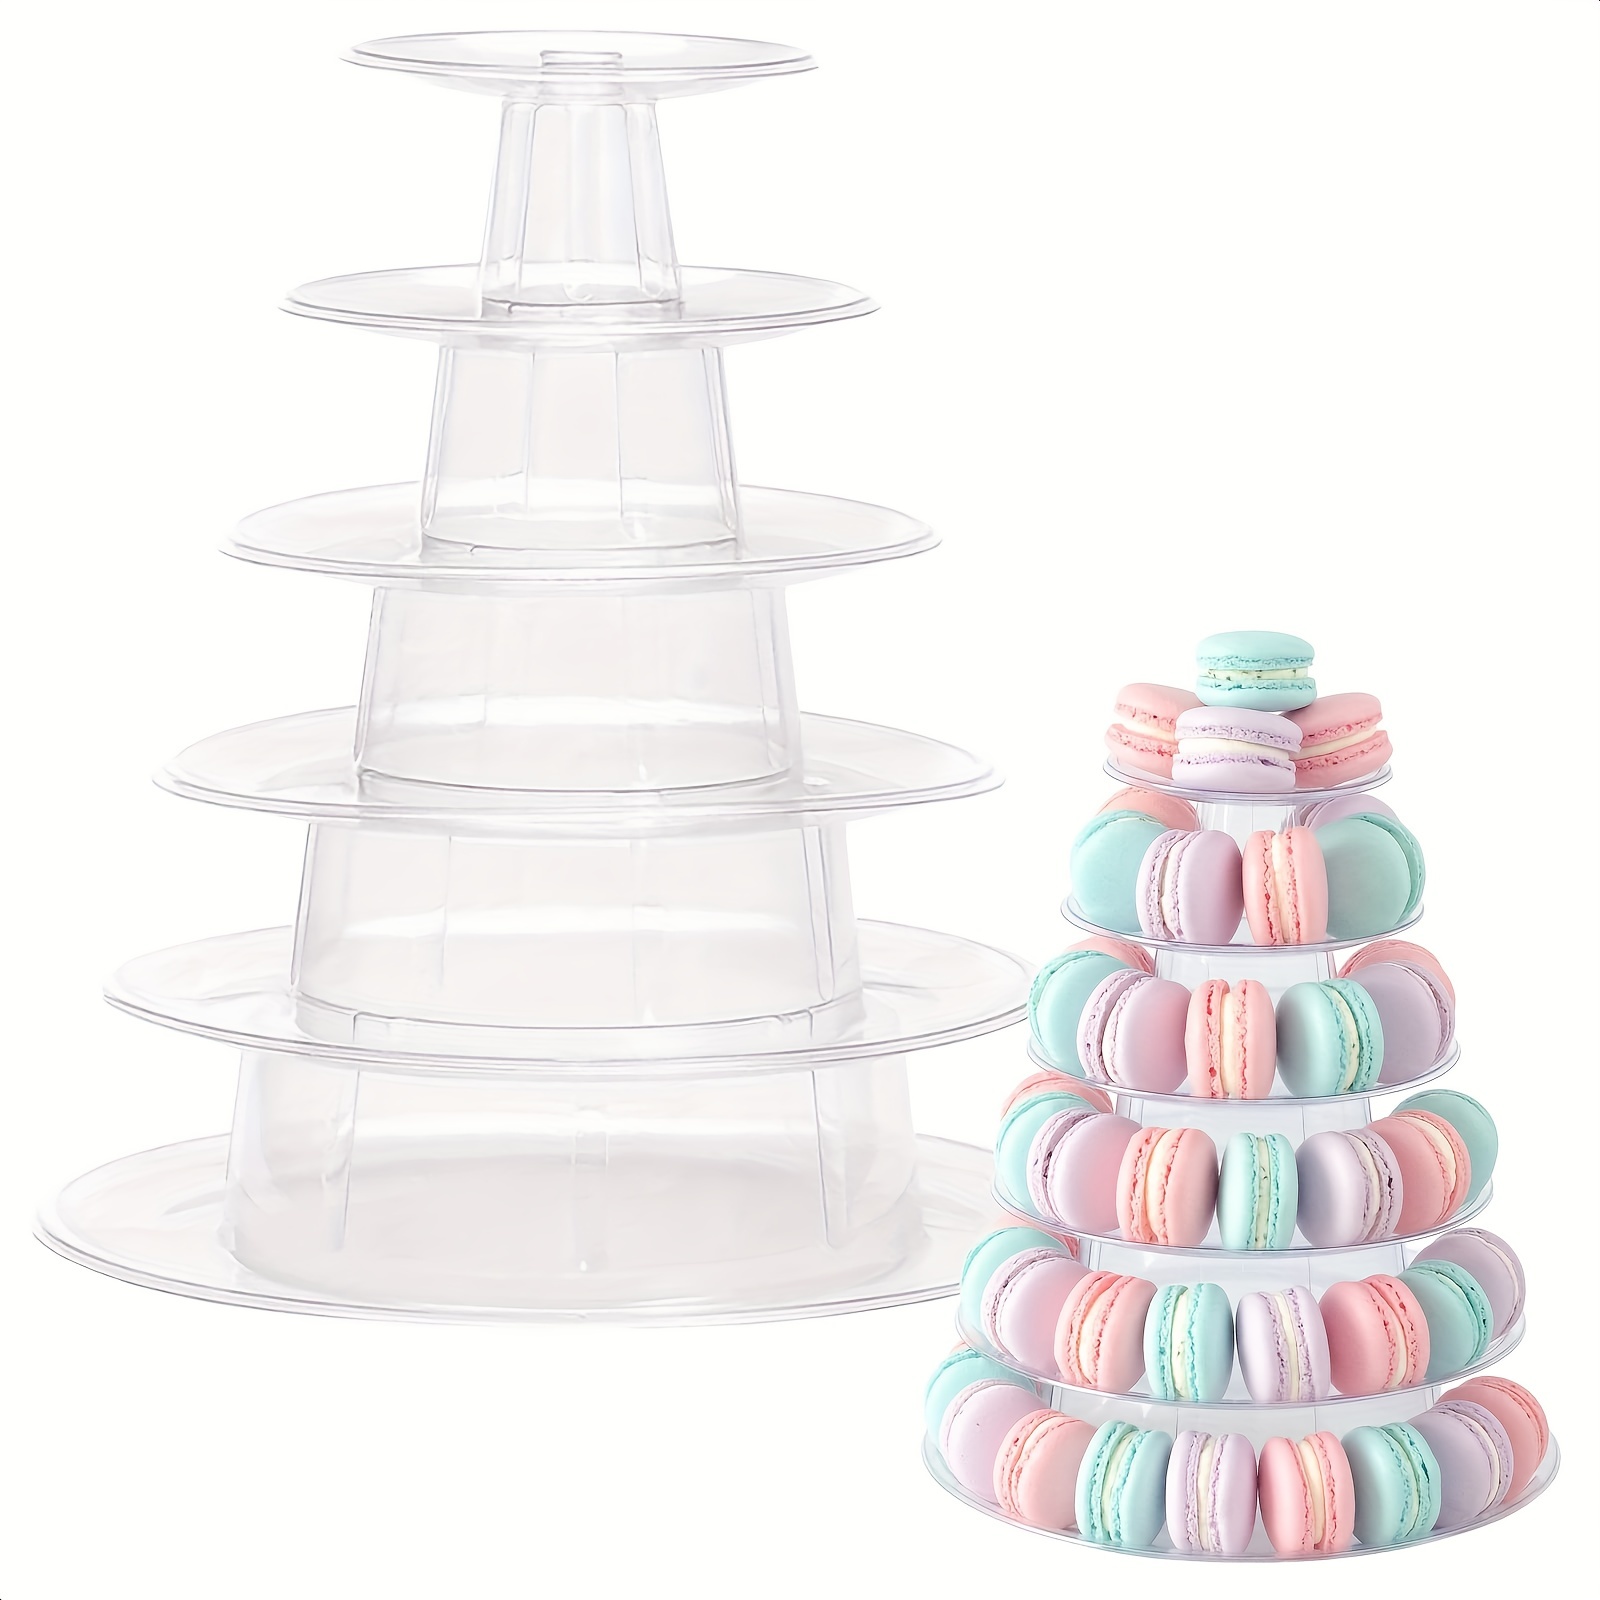 

6 Tiers Round Plastic Macaron Tower Stand Macarons Holder - Macaroon Cake Tower Display Stand For Dessert Display - Macaroon Tower Stand Cake Display Tier Round Stand For Wedding, Birthday Party